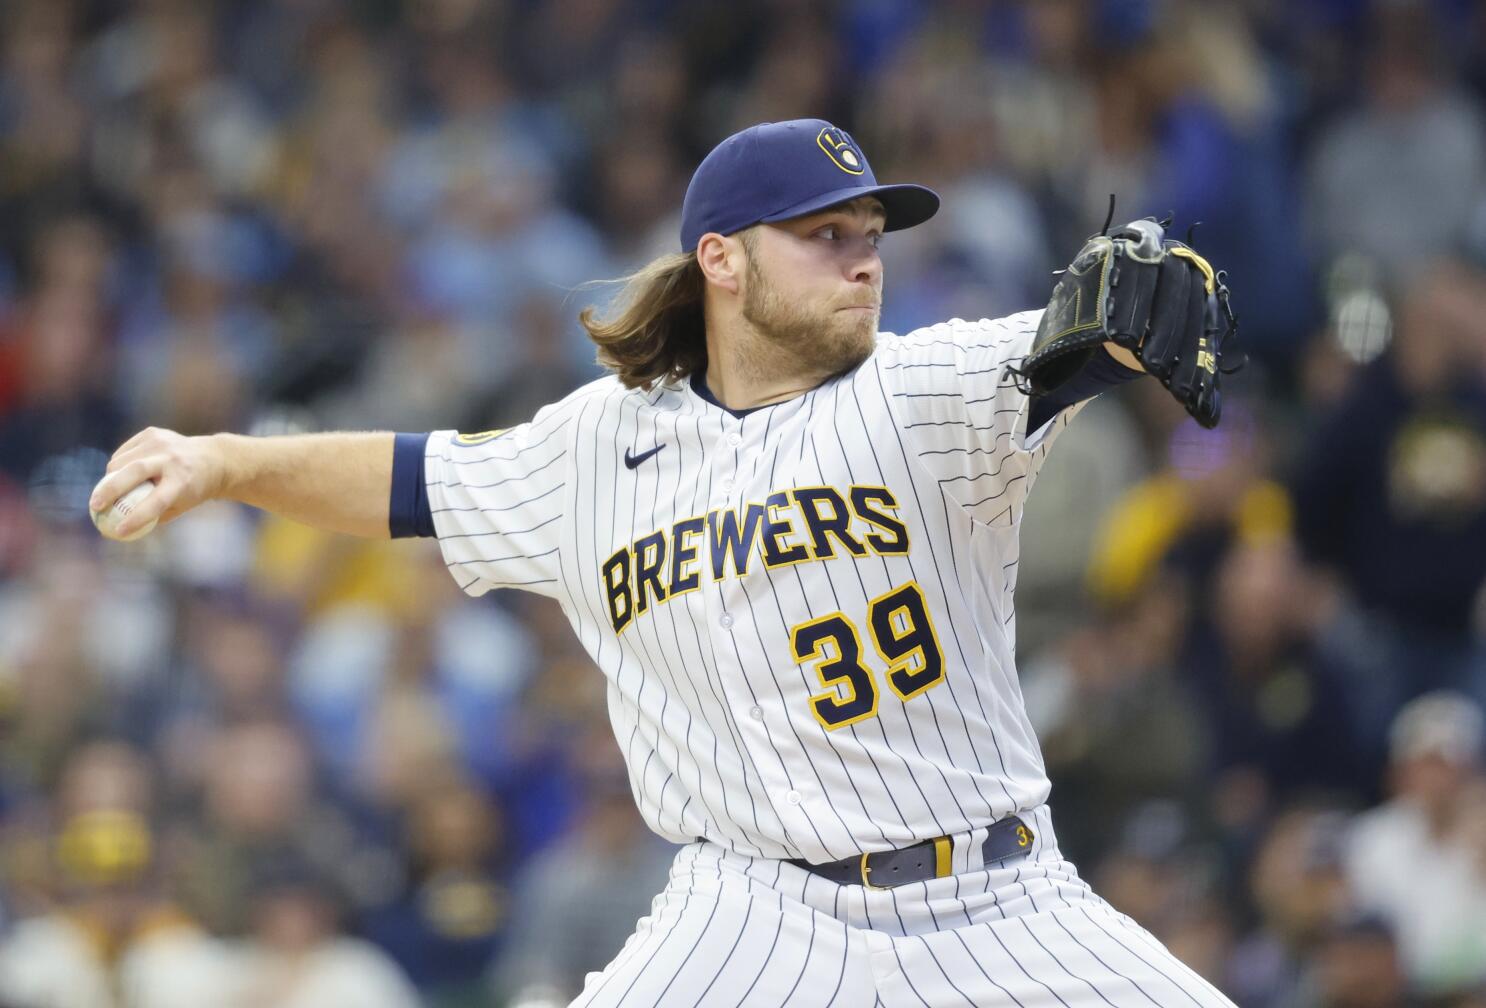 Brewers News: Brewers sign LHP Justin Wilson to one-year deal